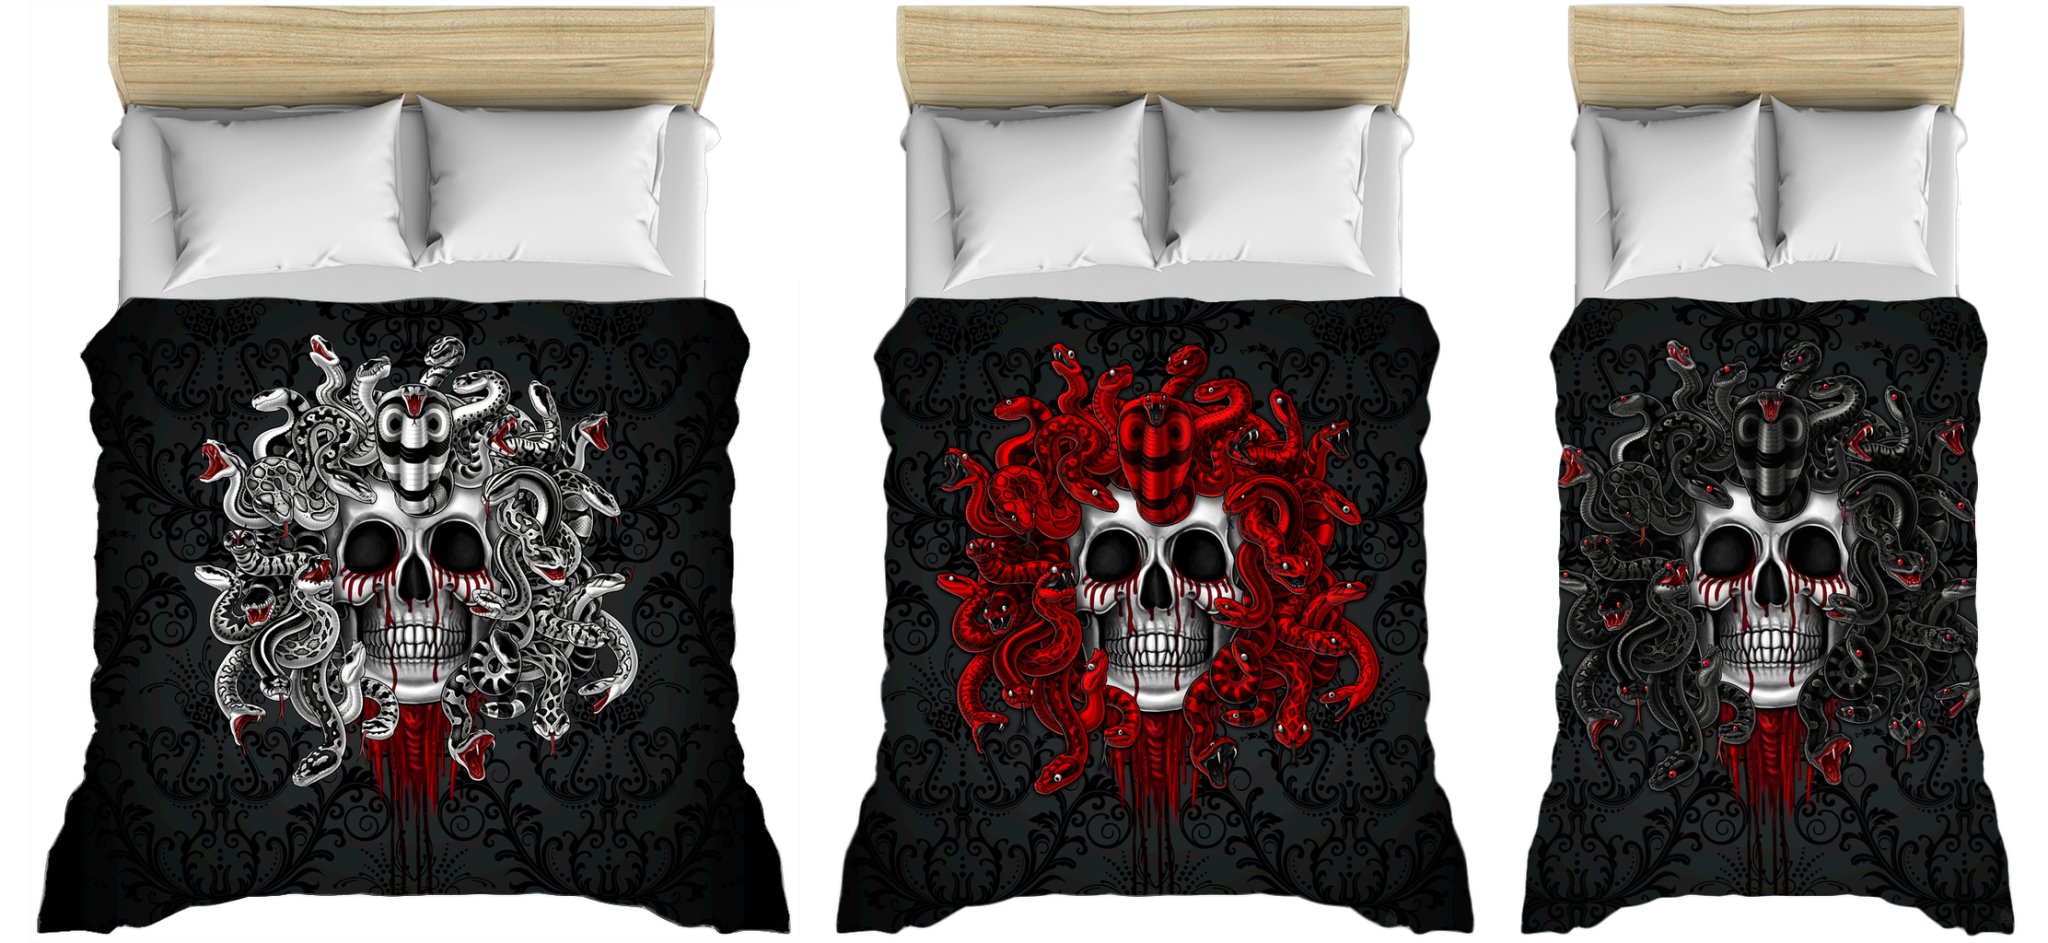 Gothic Bed Cover, Duvet or Comforter, Vampire Medusa, Nu Goth Bedding Set, Black Bedroom Decor, King, Queen & Twin Size - 2 Faces, 3 Colors - Abysm Internal